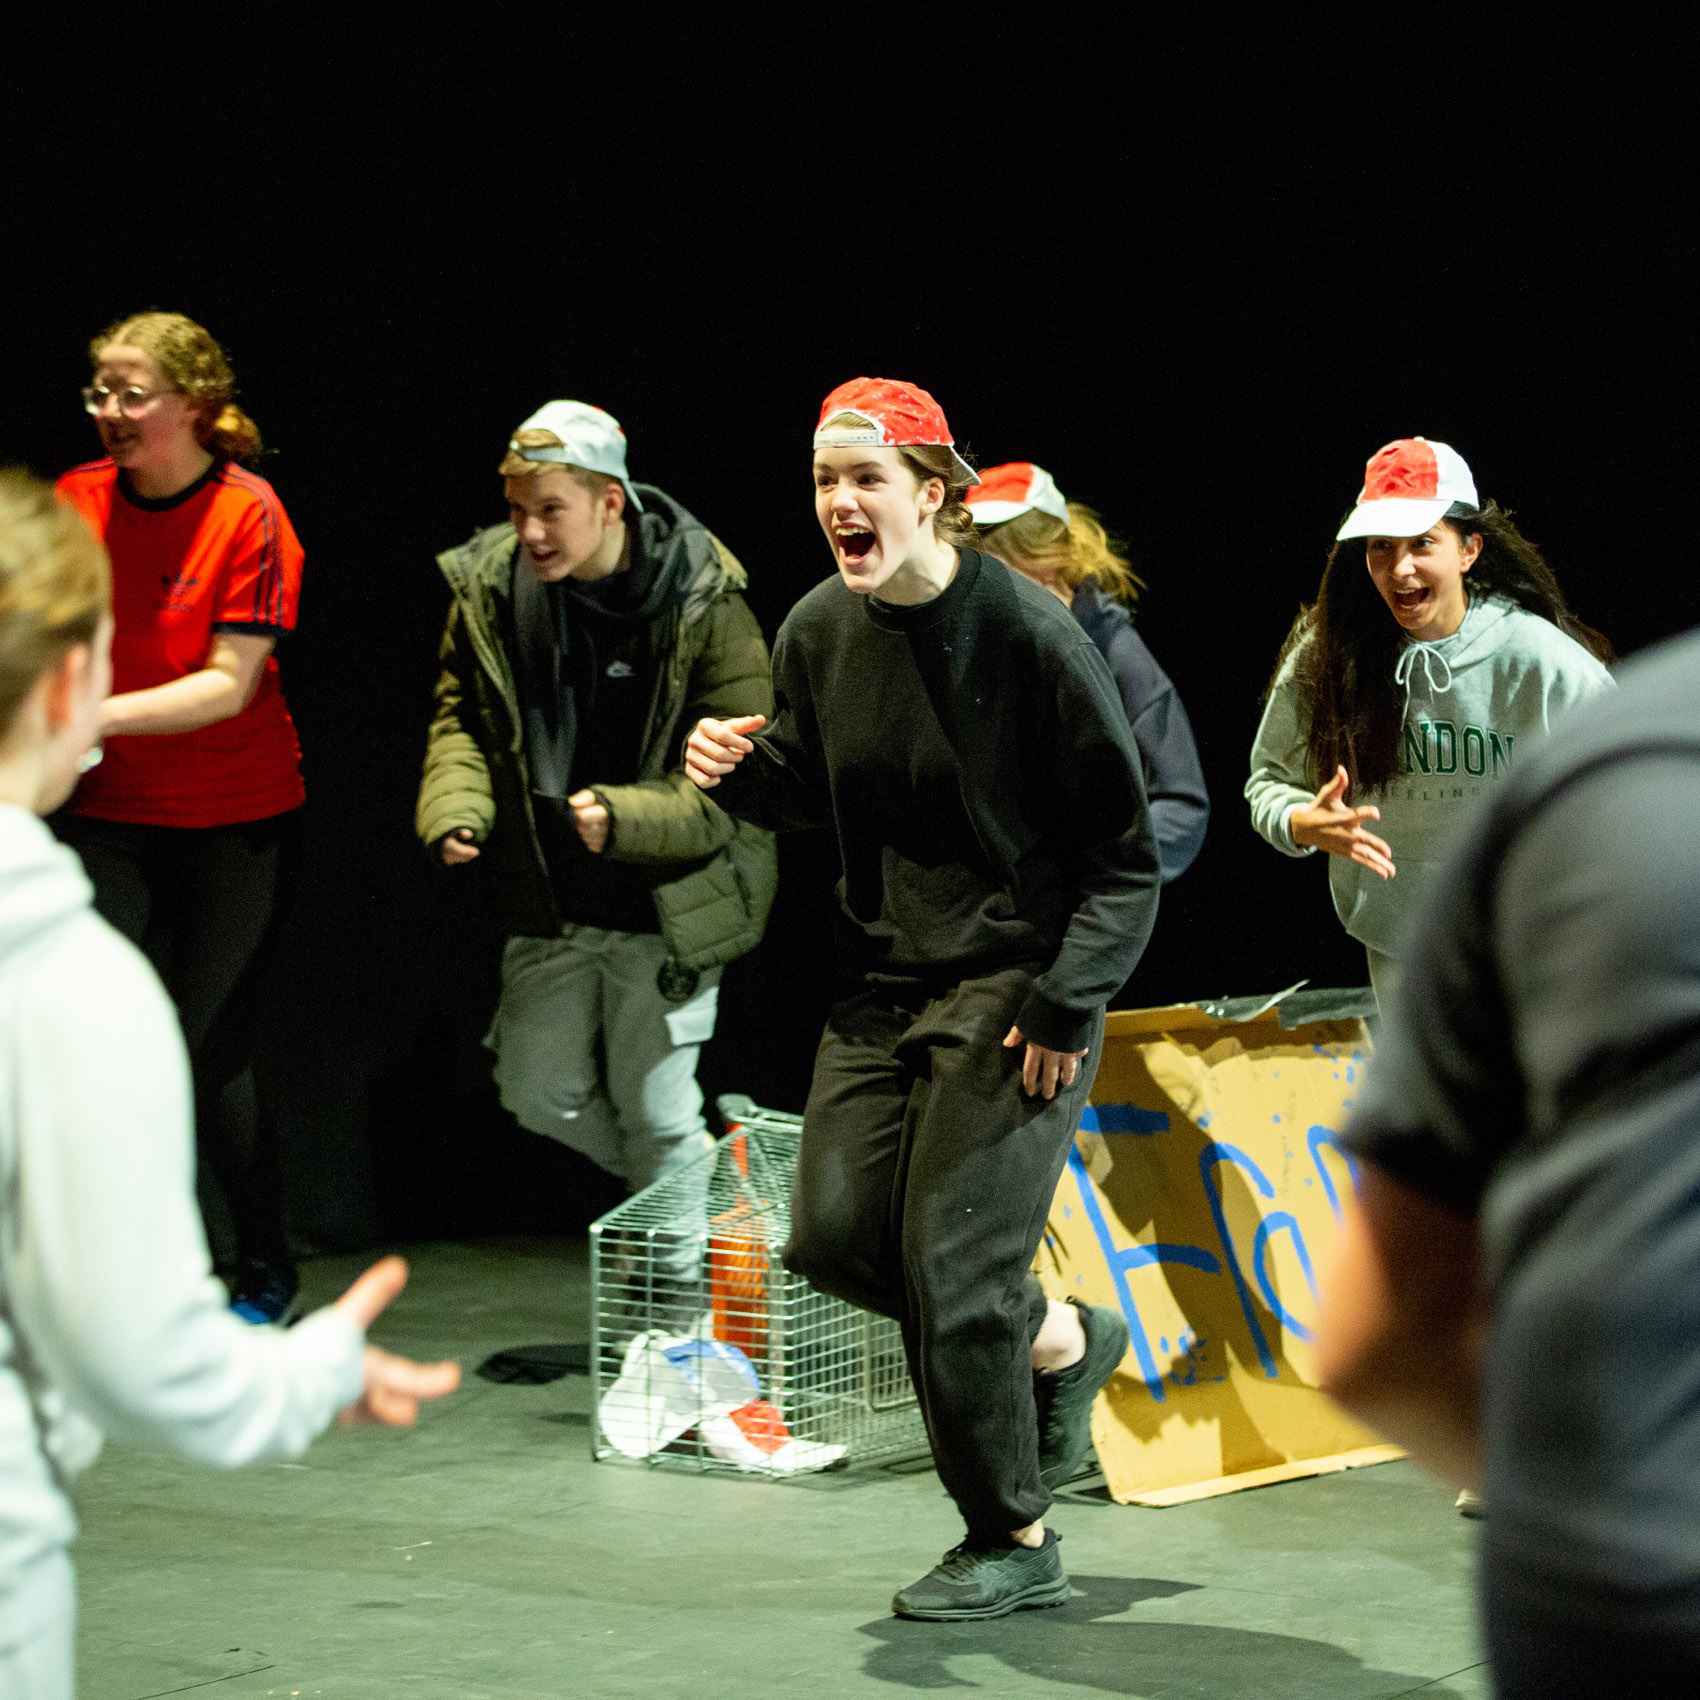 Smiling teenagers in costumes and backwards baseball caps run at each other on a theatre stage.